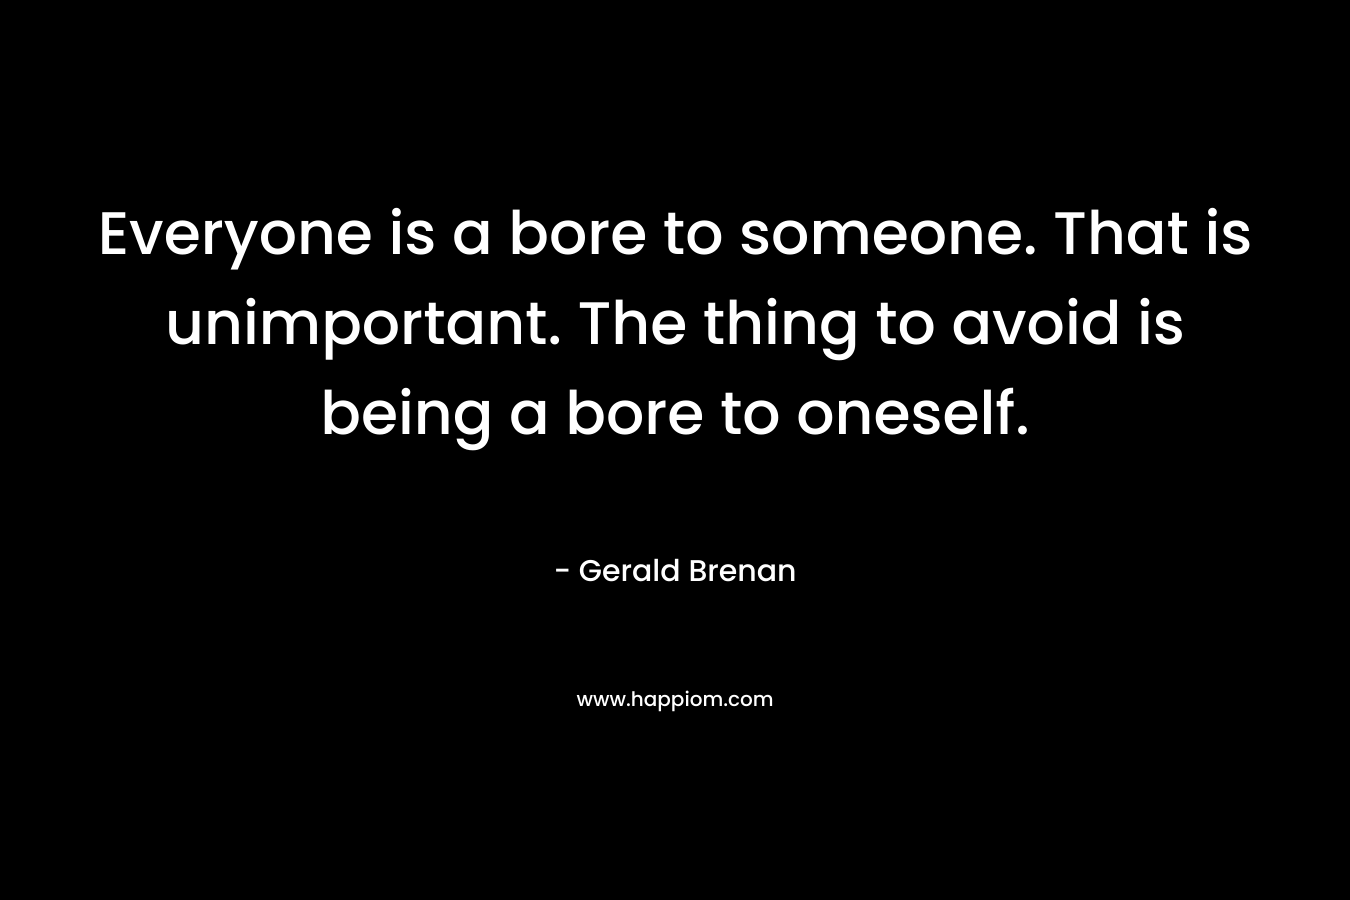 Everyone is a bore to someone. That is unimportant. The thing to avoid is being a bore to oneself. – Gerald Brenan